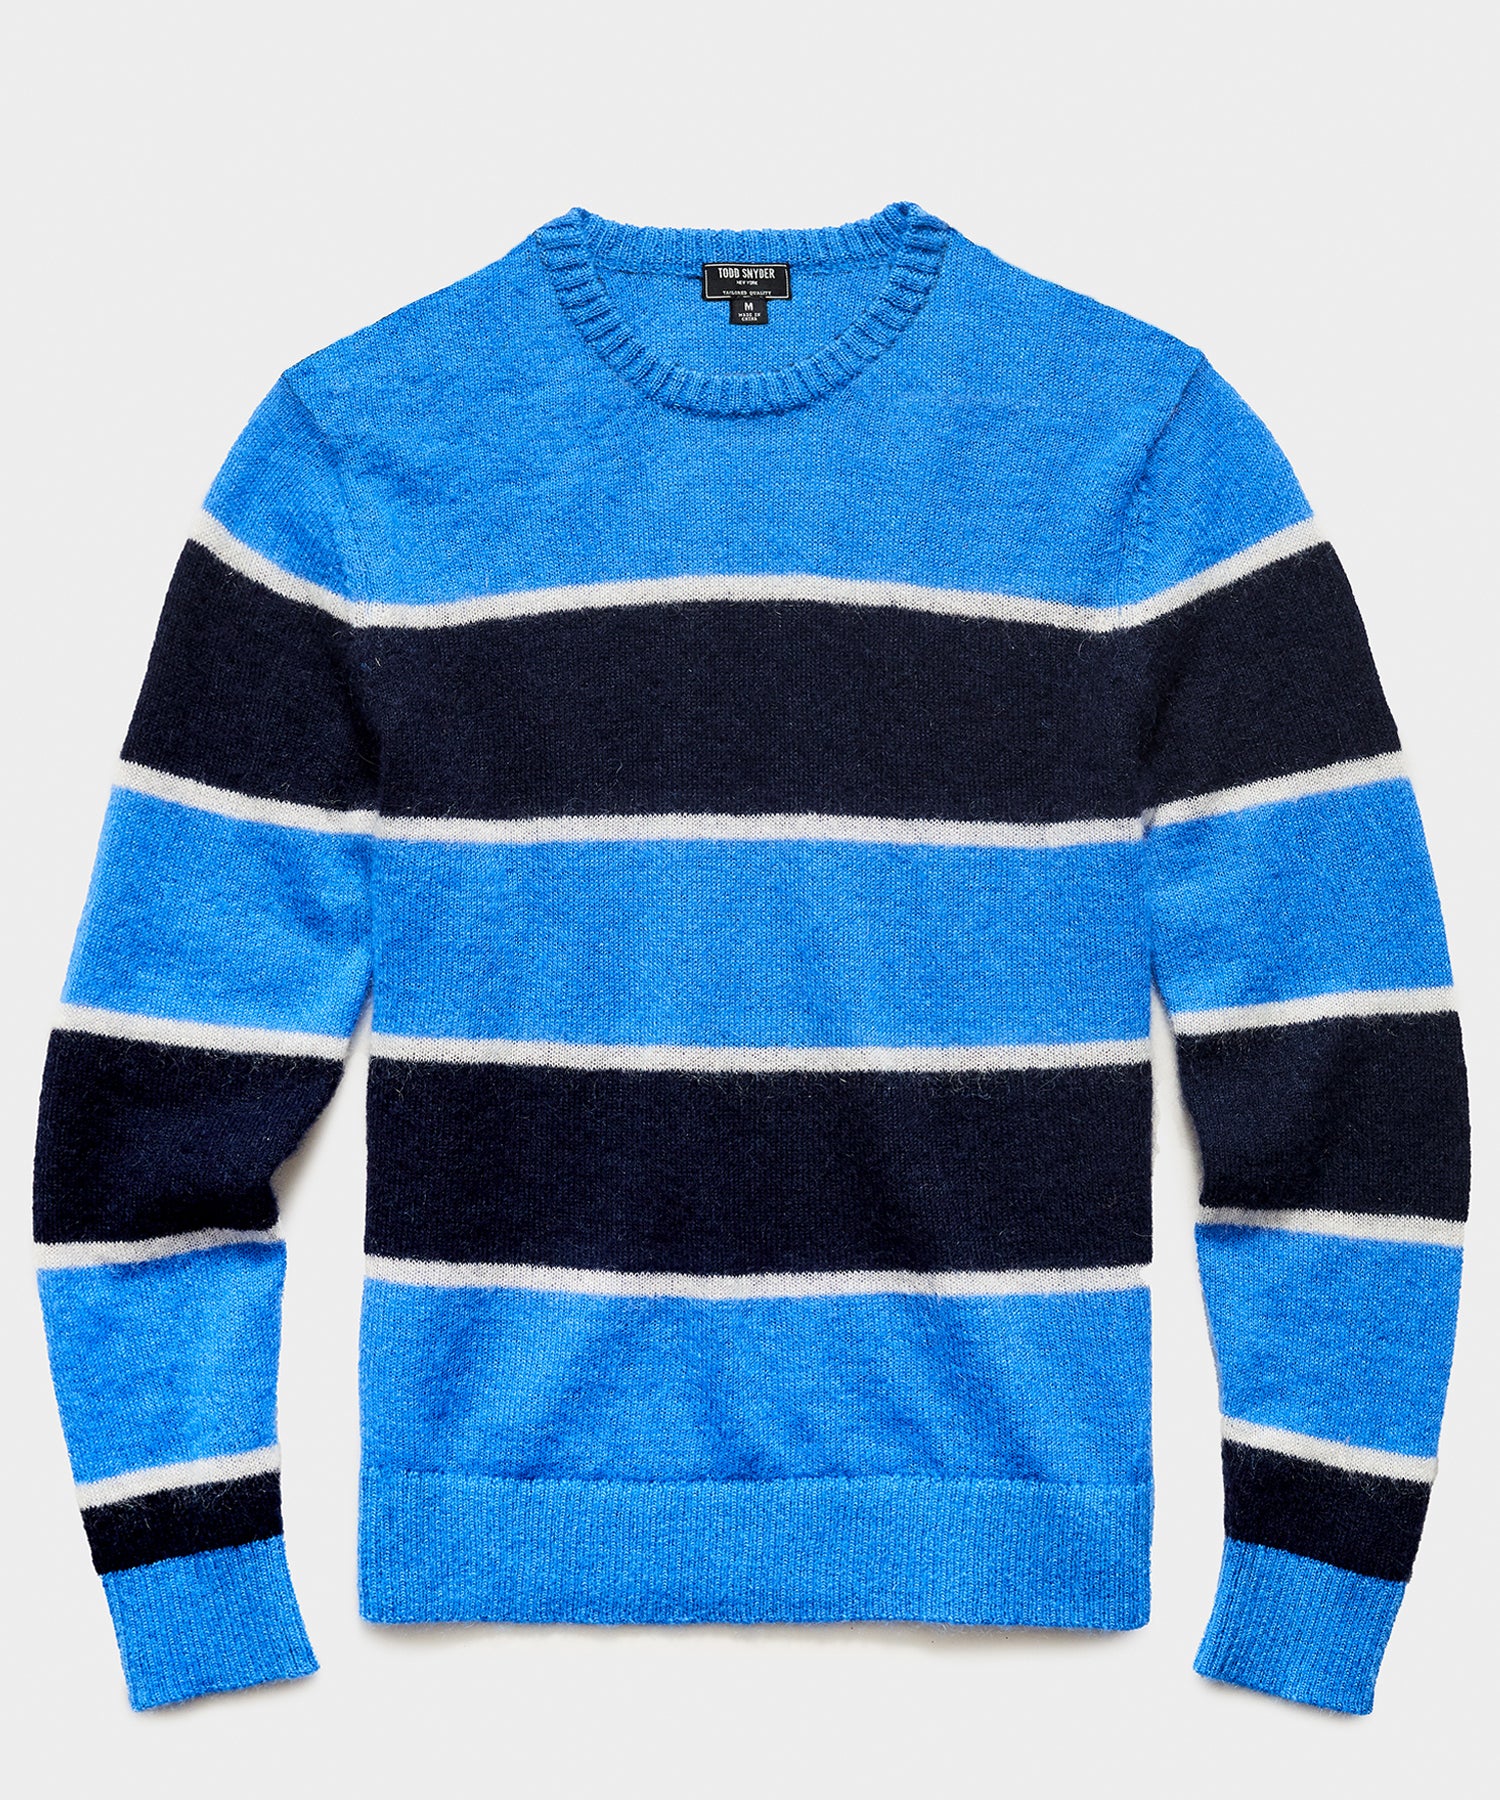 14 Best Mohair Sweaters for Men 2022